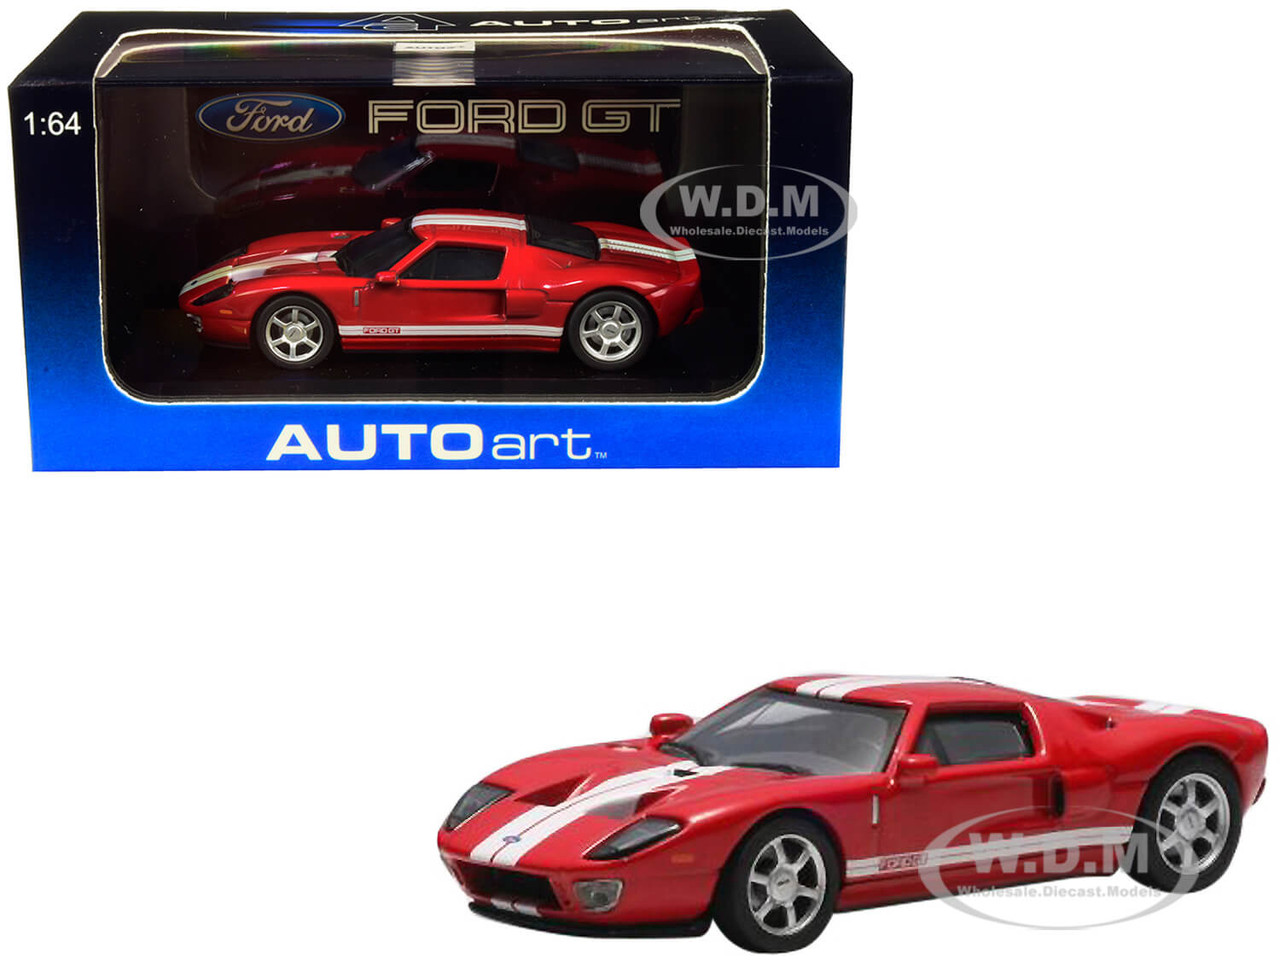 Ford GT40 Mk II Review by Frank McCurdy (Trumpeter 1/12)